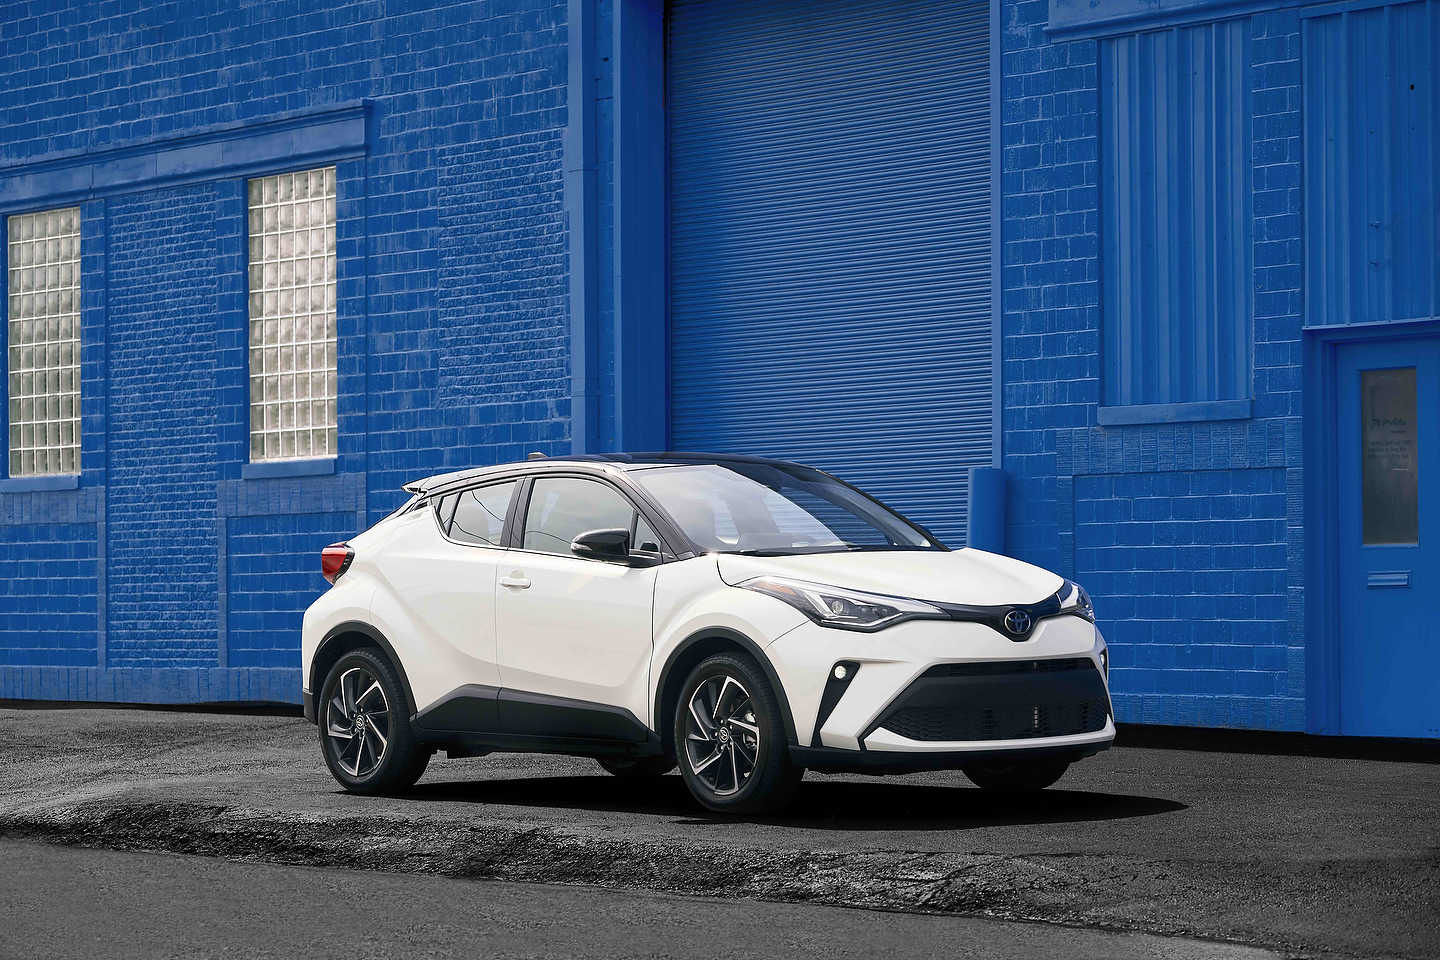 Vimont Toyota Laval  2021 Toyota C-HR vs 2021 Chevrolet Trailblazer: Which  is the Most Reliable Option?